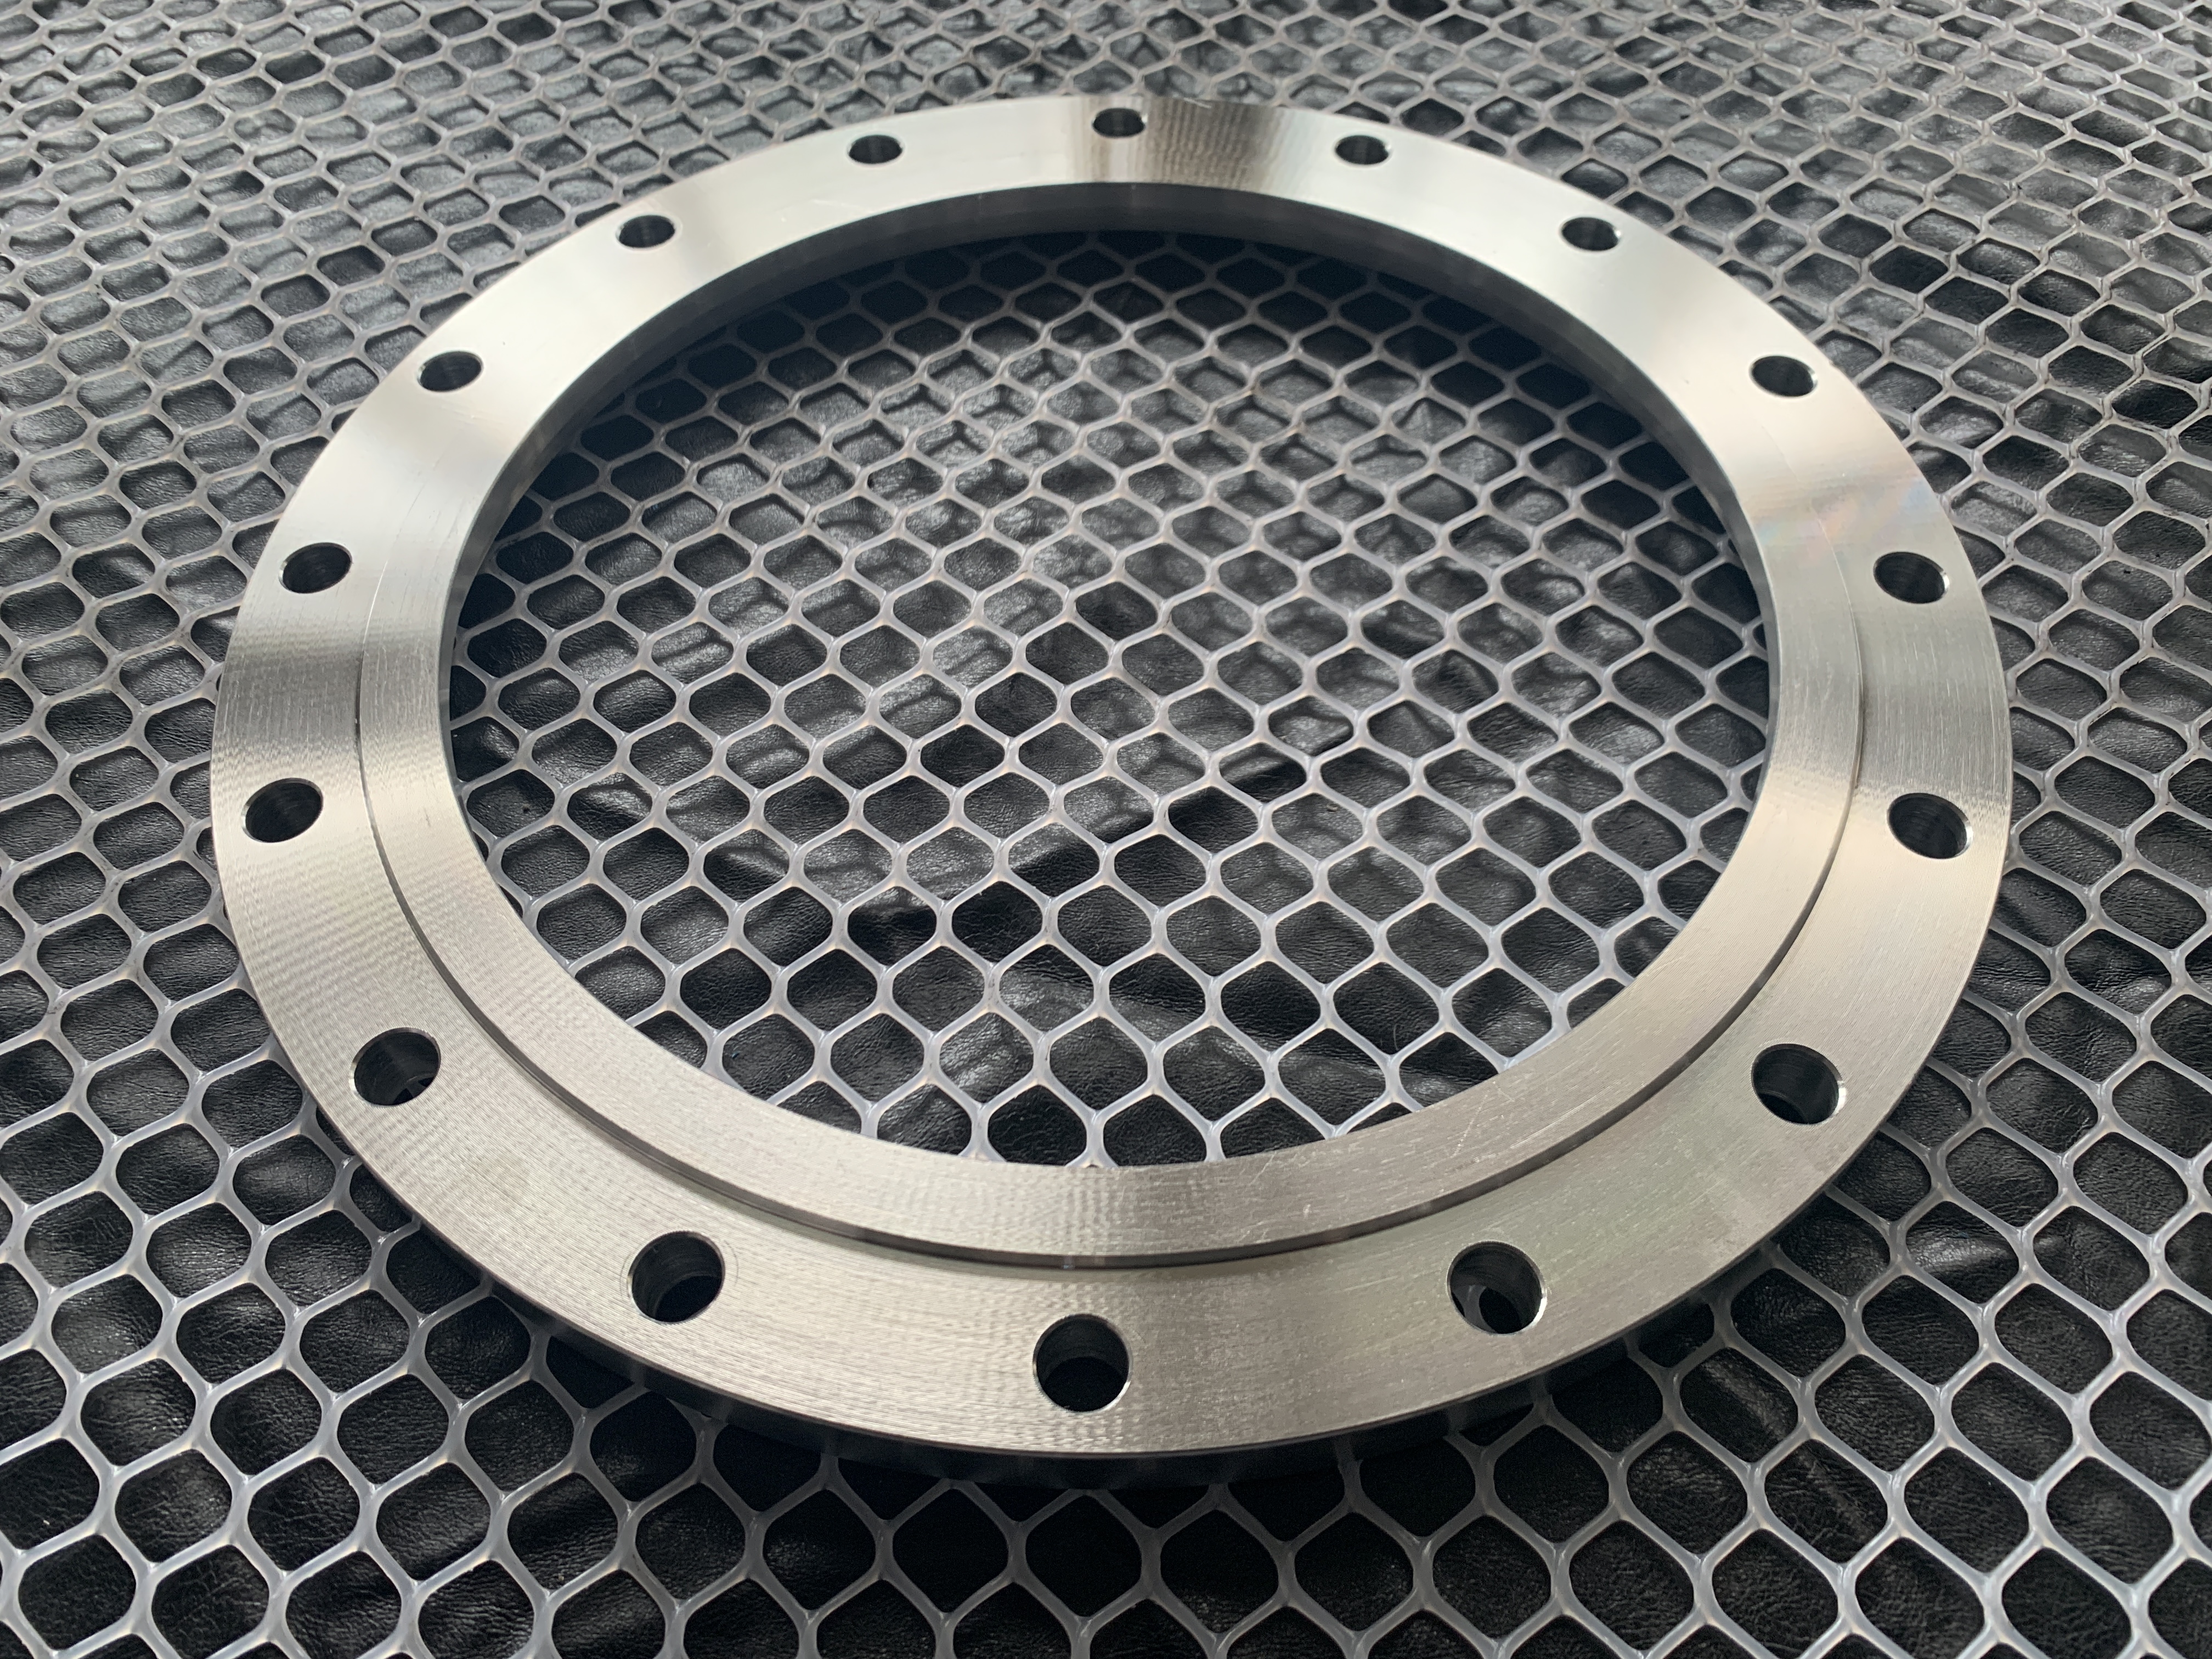 ASME B16.49 stainless steel flat flange for 150LBS CDPL068